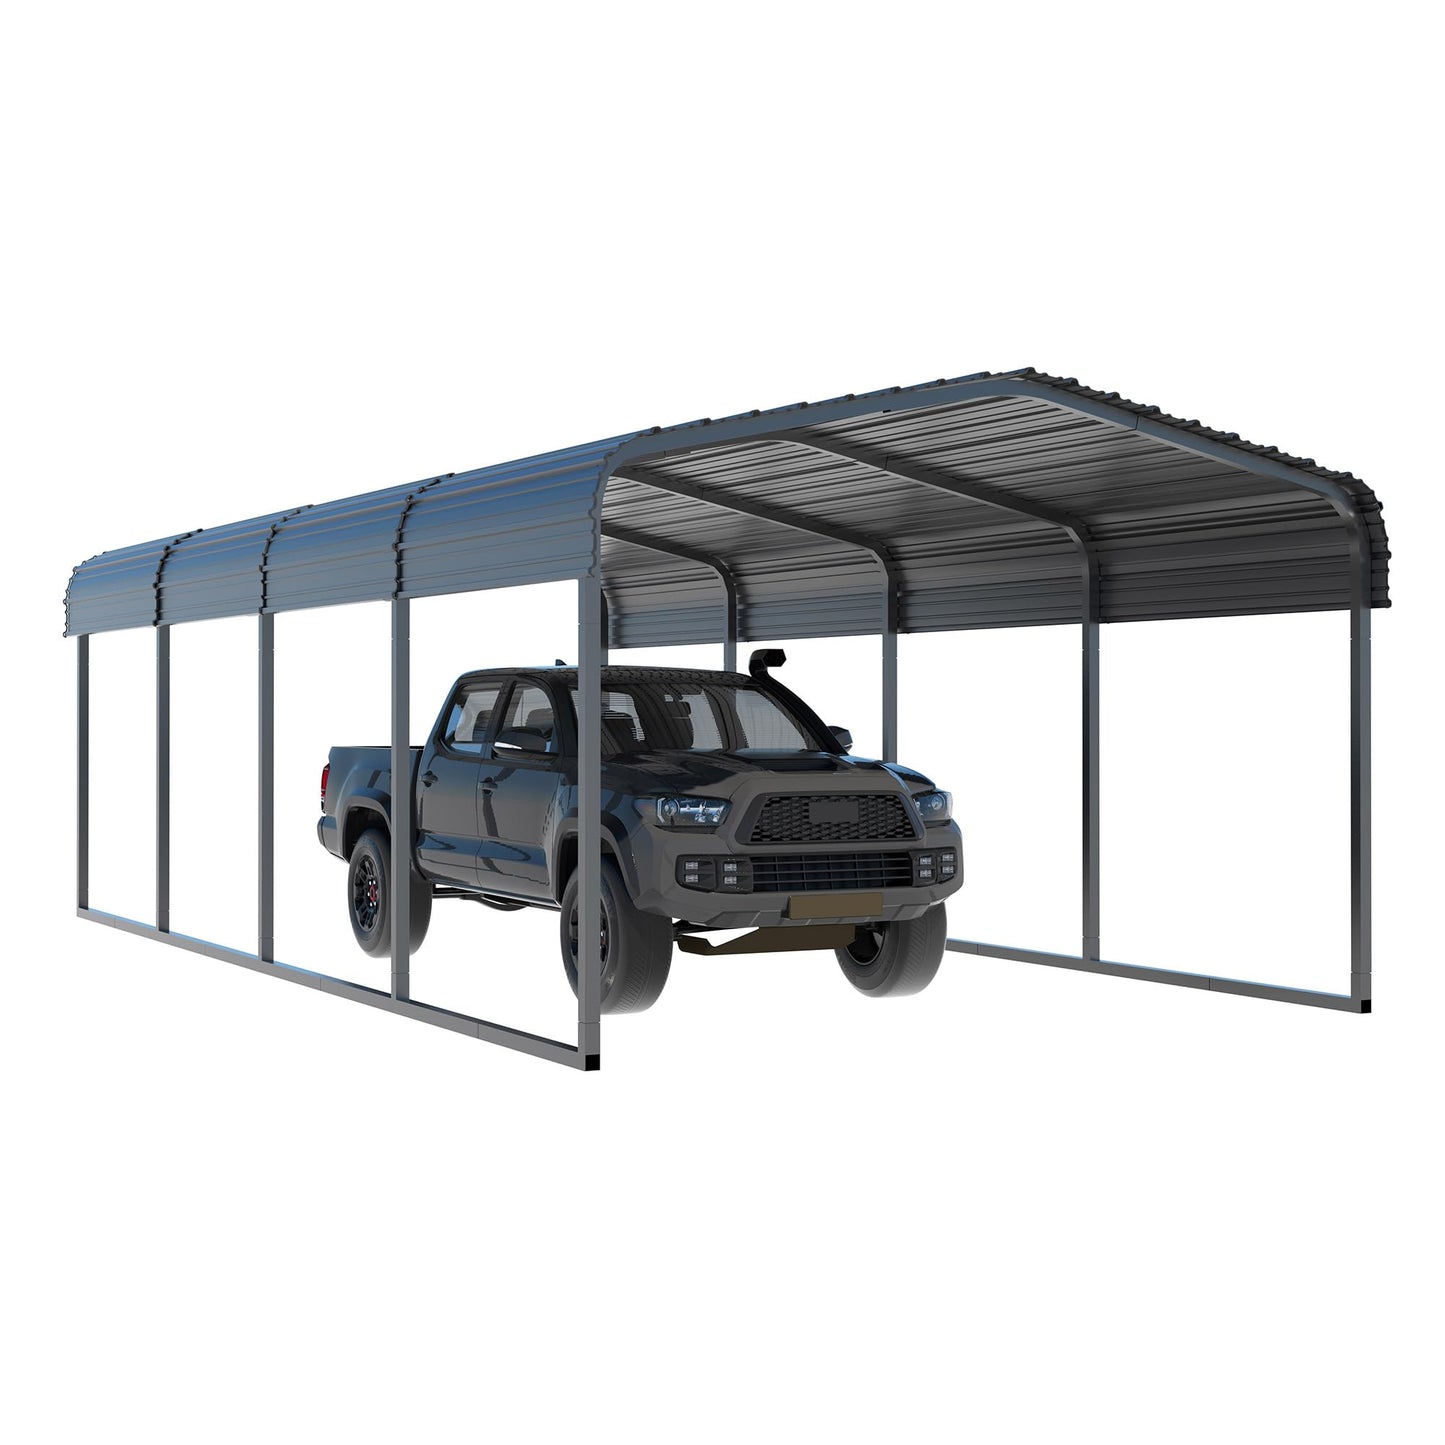 MUPATER Outdoor Carport, 12' x 20' Heavy Duty Canopy for Garage,Car Garage Shelter with Galvanized Metal Roof and Frame for Car, and Boat, Grey